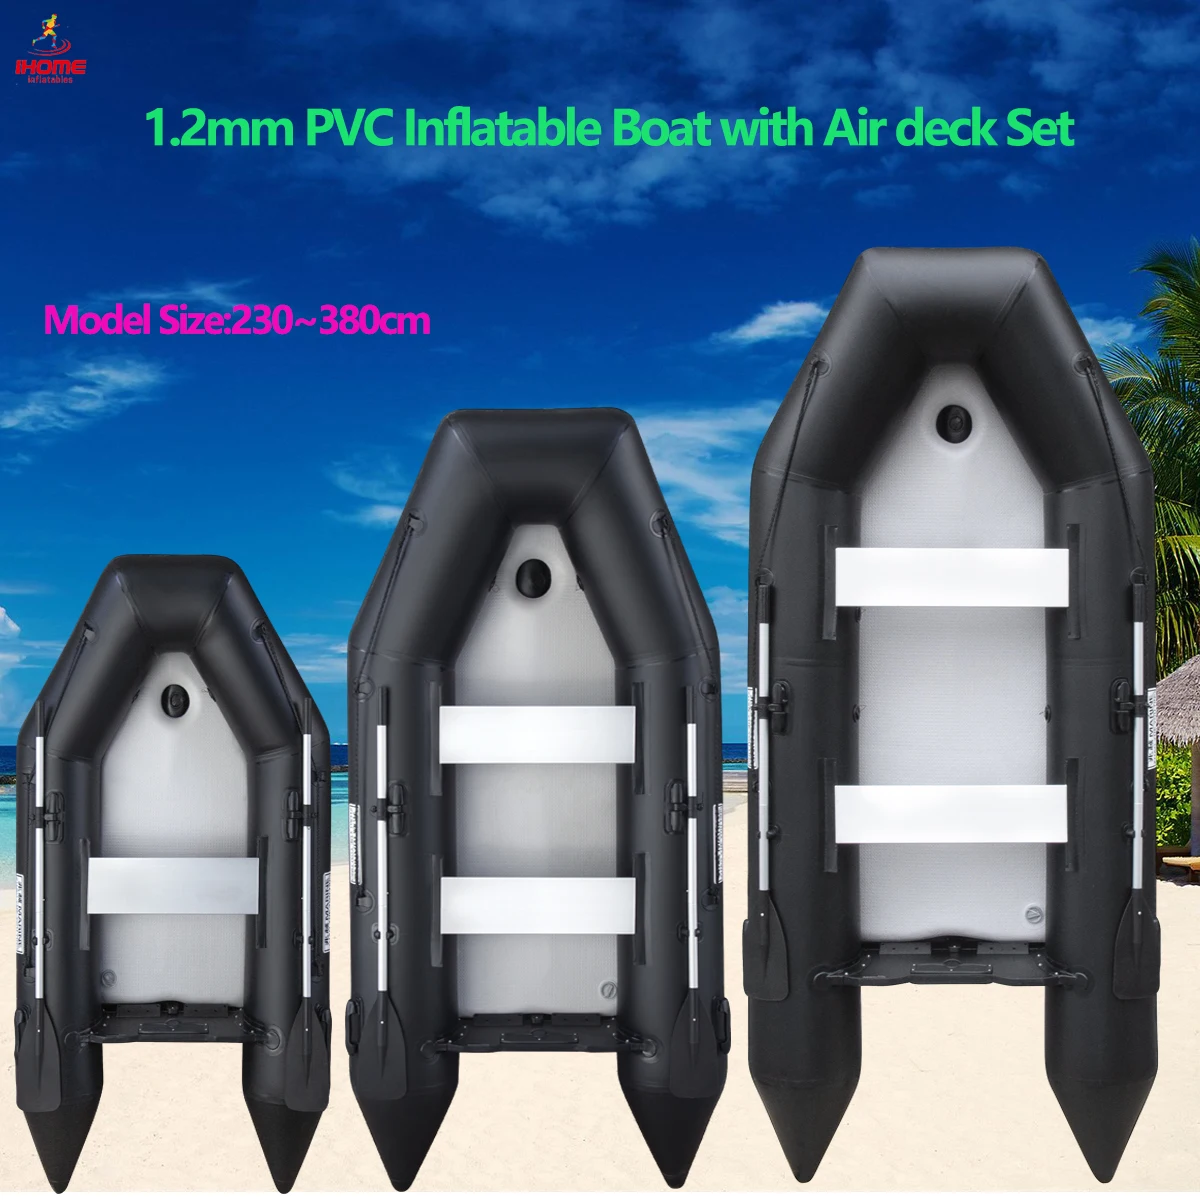 

2.3~3.8m Inflatable Boat with Air Deck Set 1.2mm PVC Assault Boats with Anti-collision Speed Raft Kayak Rowing Accessories